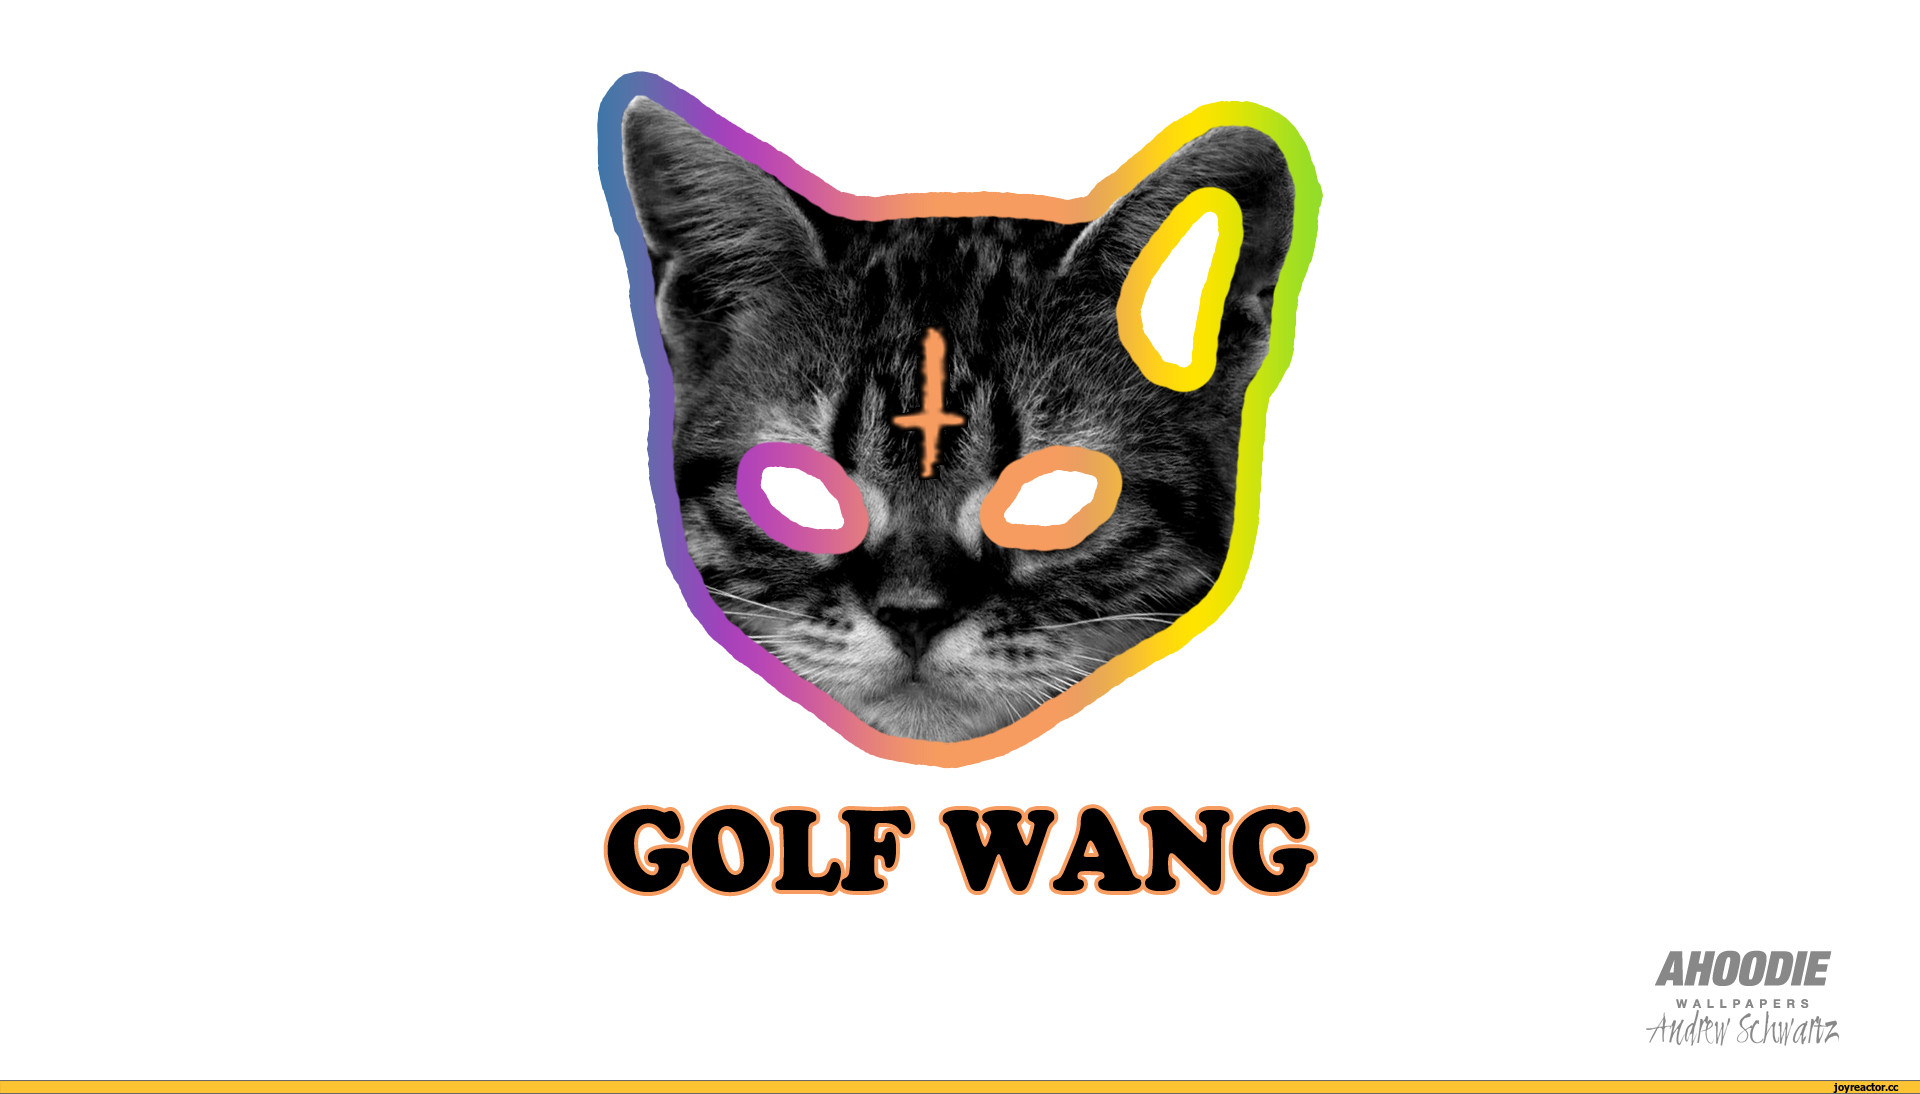 1920x1094 Wallpapers Golf Wang Cats Related Pictures Odd Future Hd